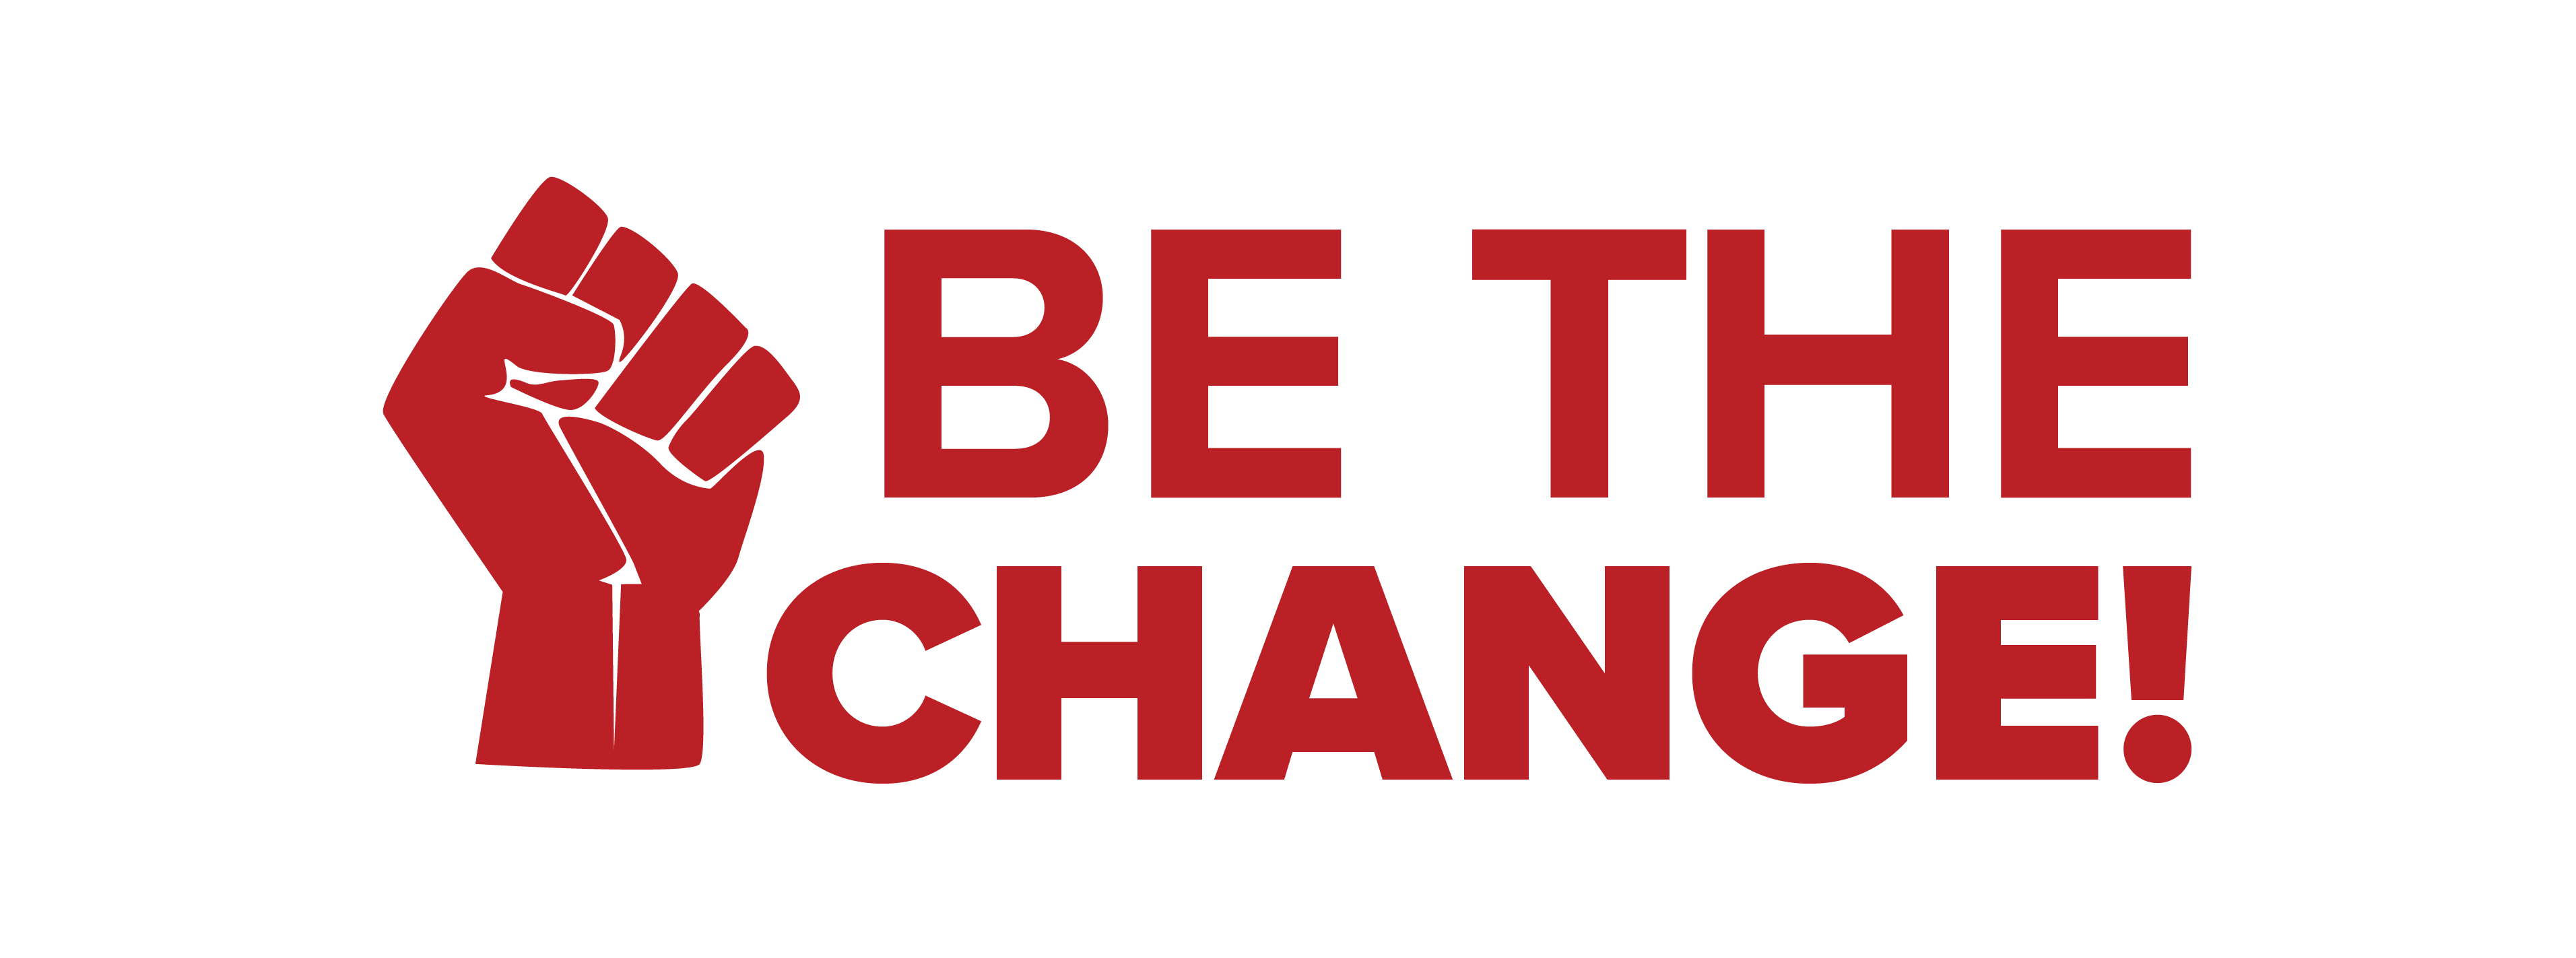 "Be the Change!" logo with red fist